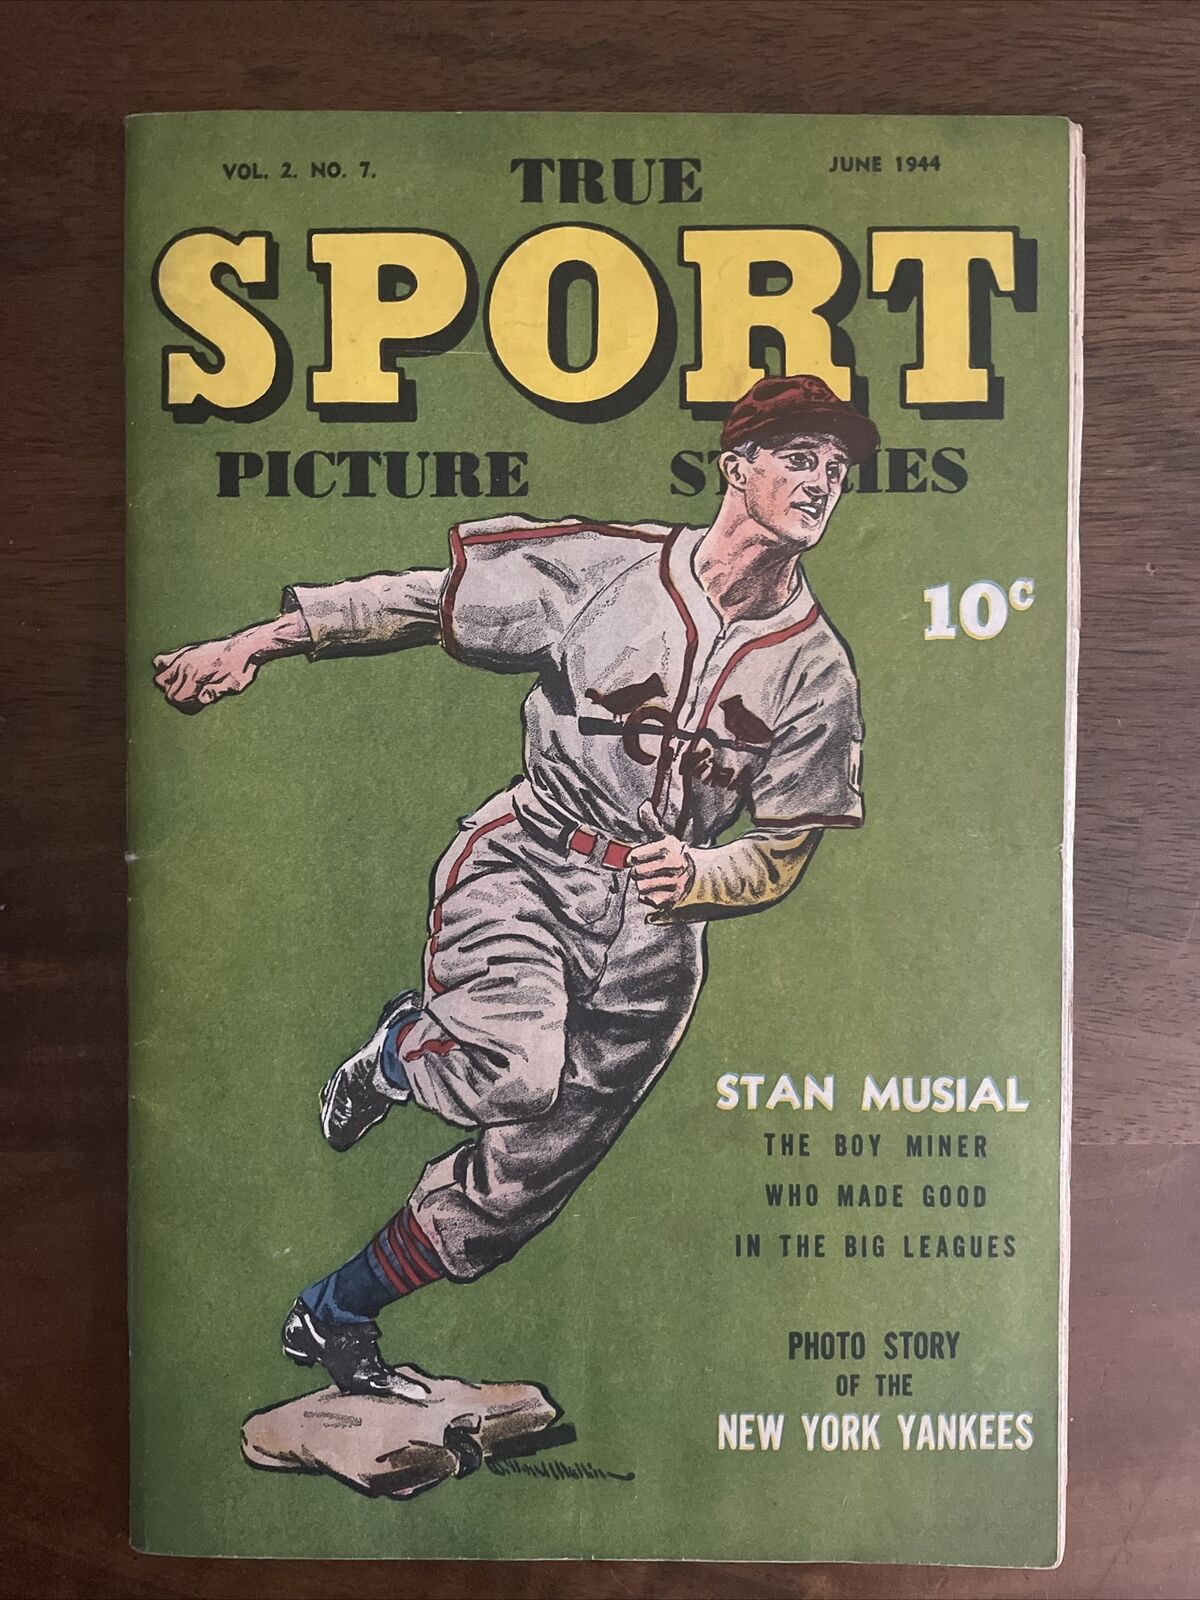 Vintage 1944 True Sports Picture Stories Vol 2 # 7, Stan Musial Cover Yankees